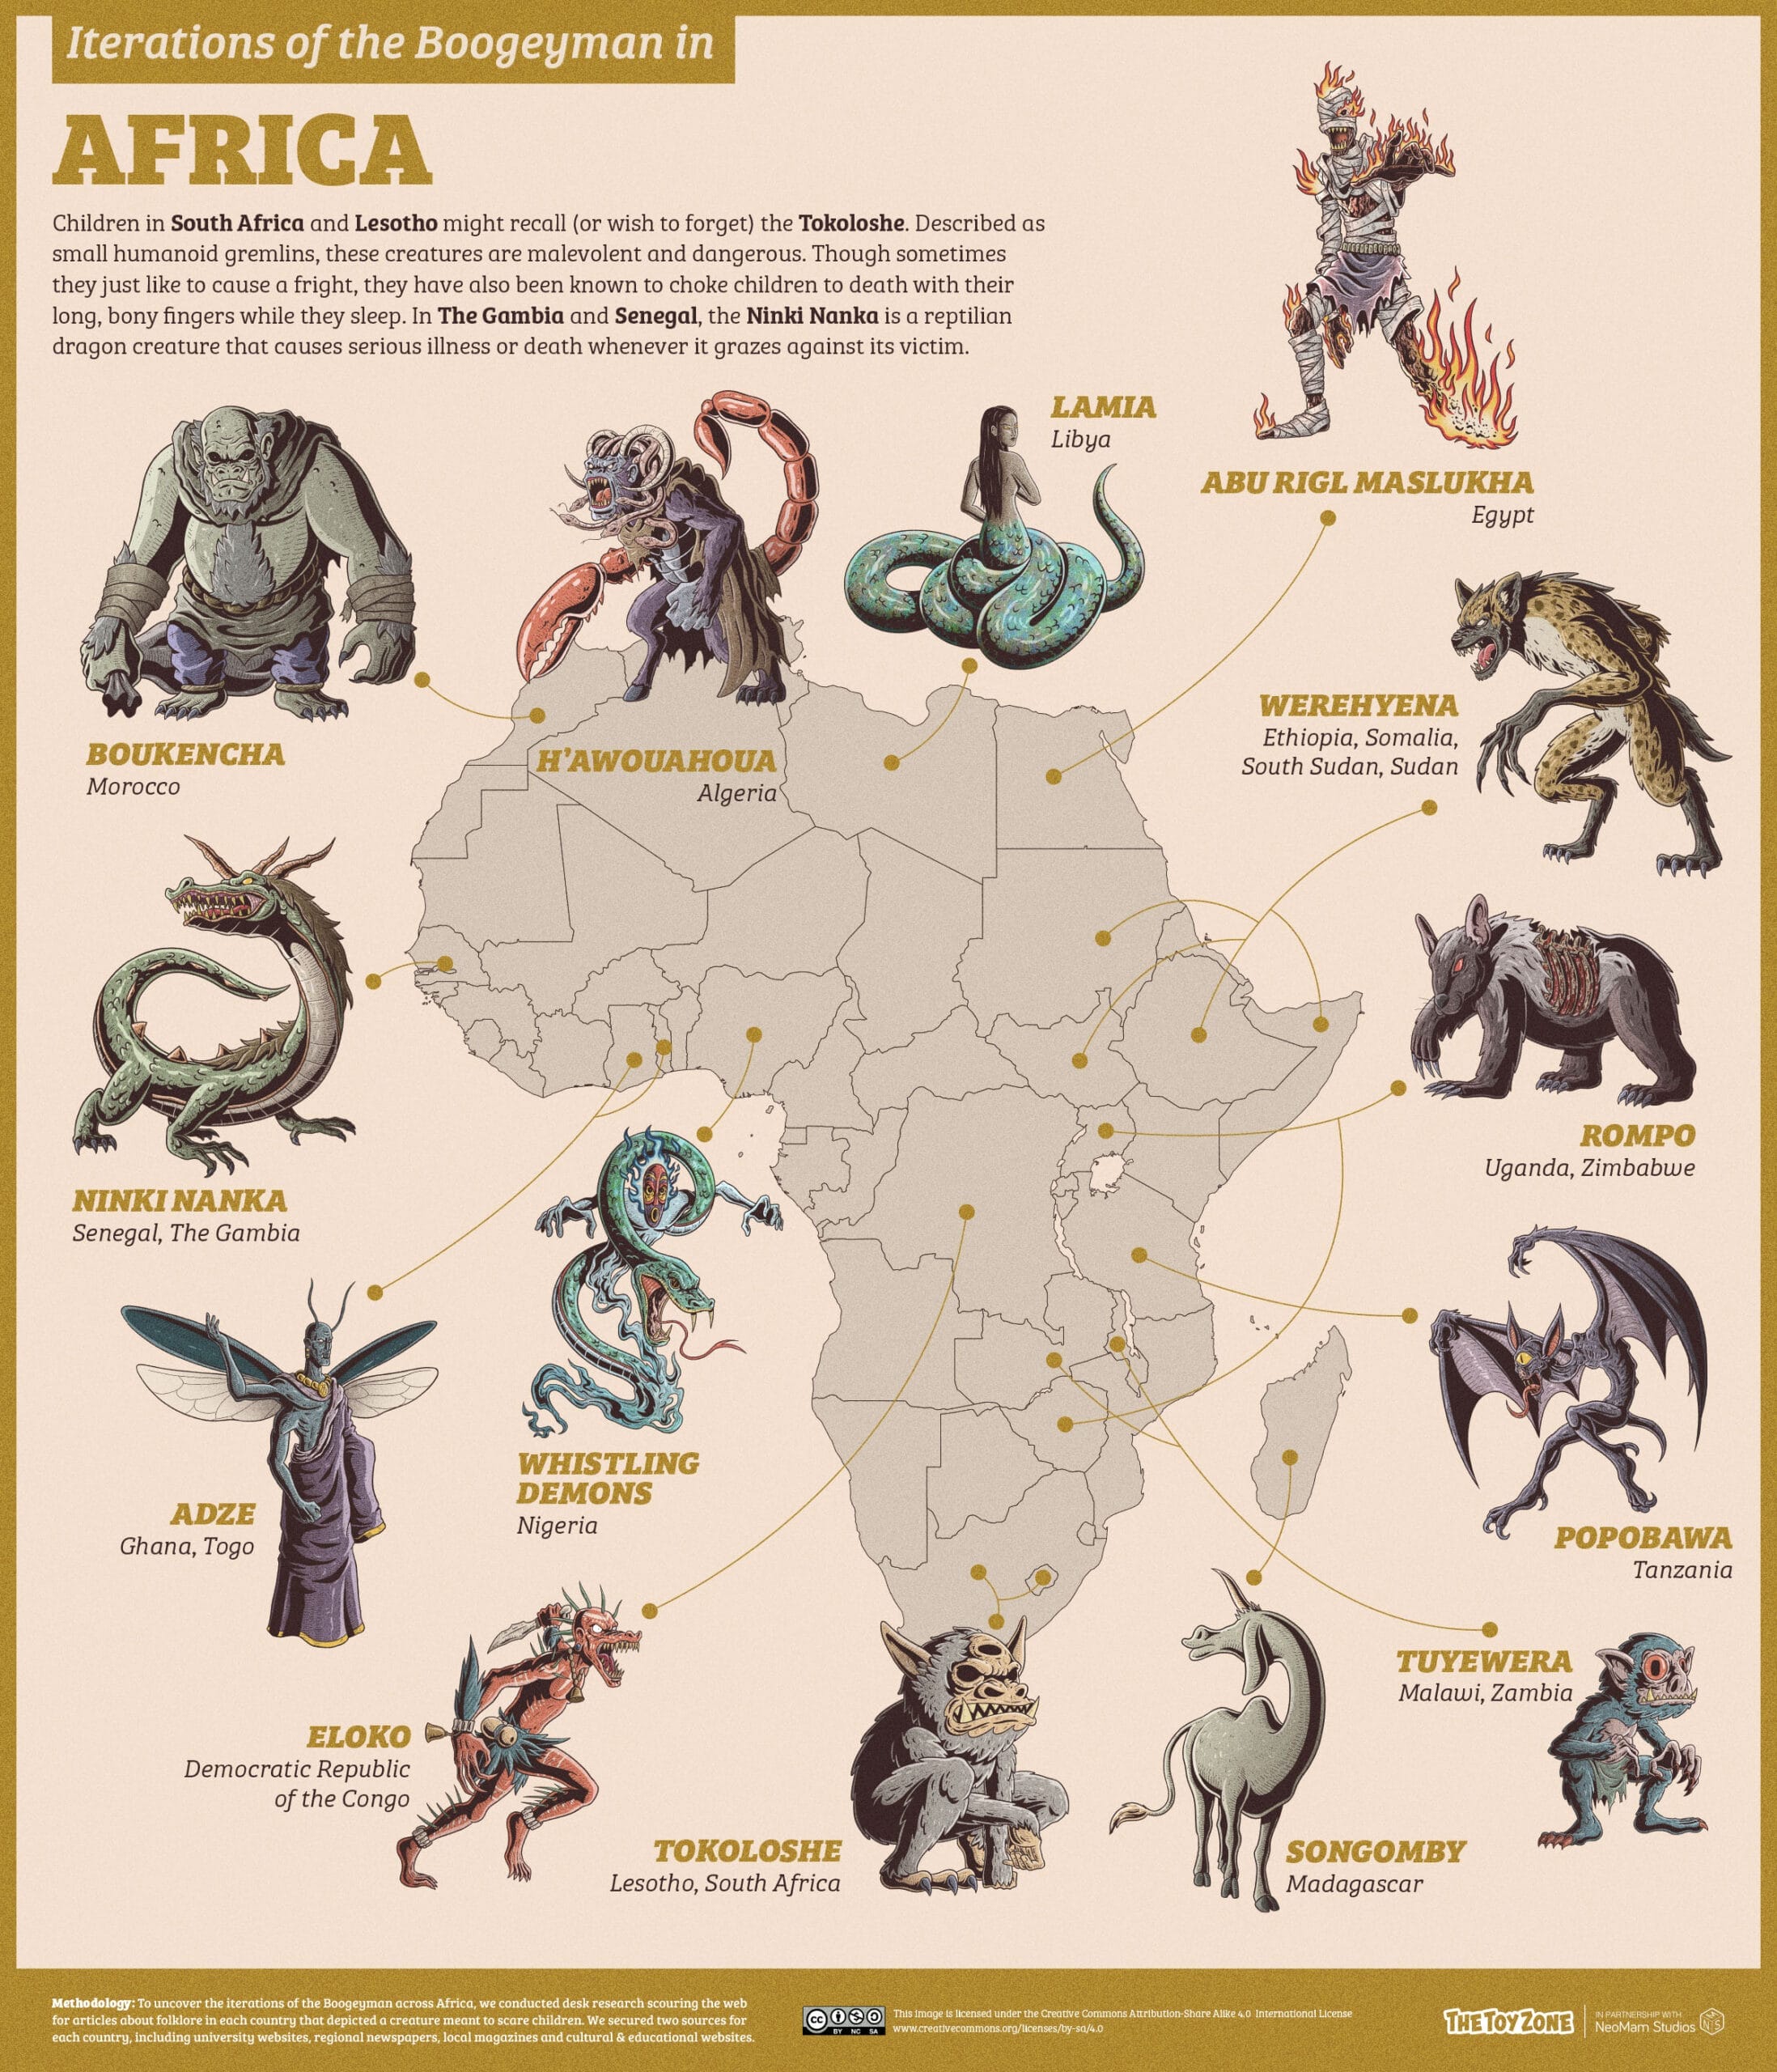 Folklore representations of the boogeyman in Africa